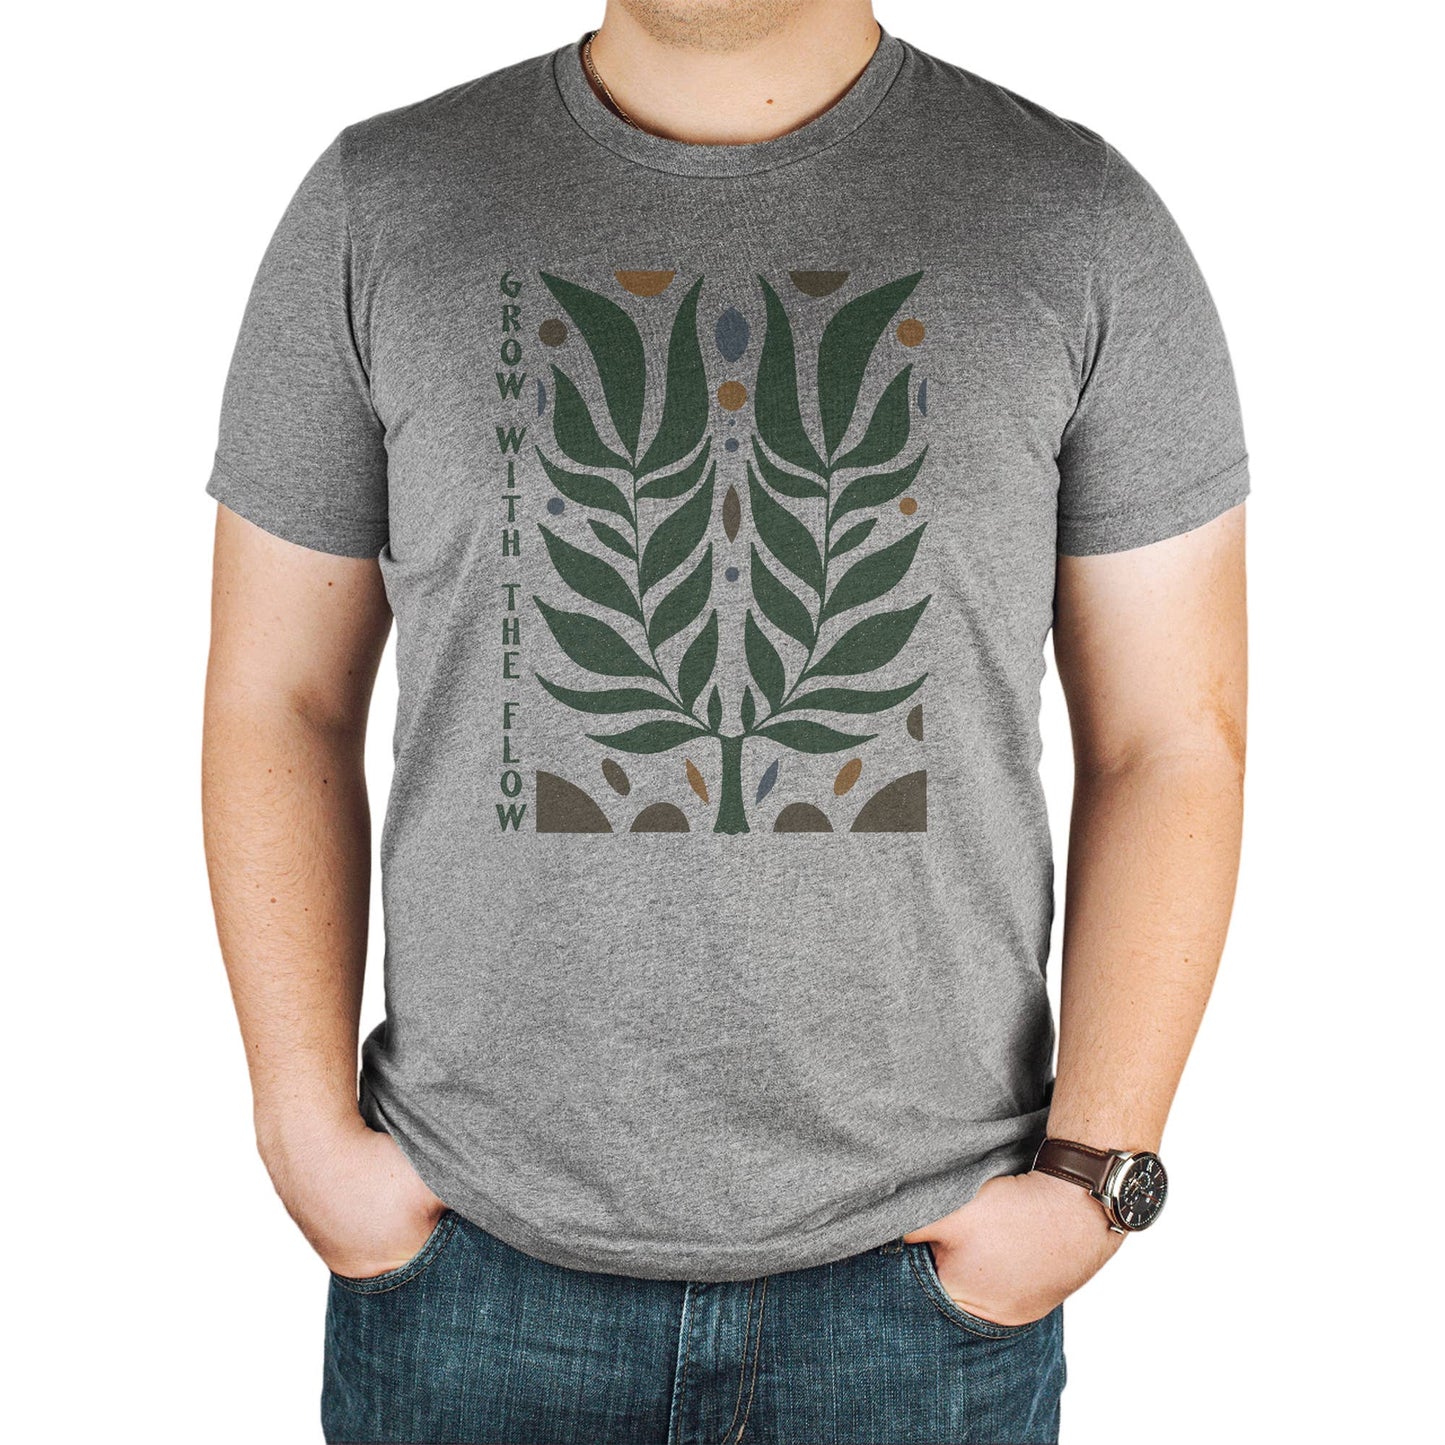 Grow With the Flow Shirt | Shirt That Plants Trees | Eco Tee